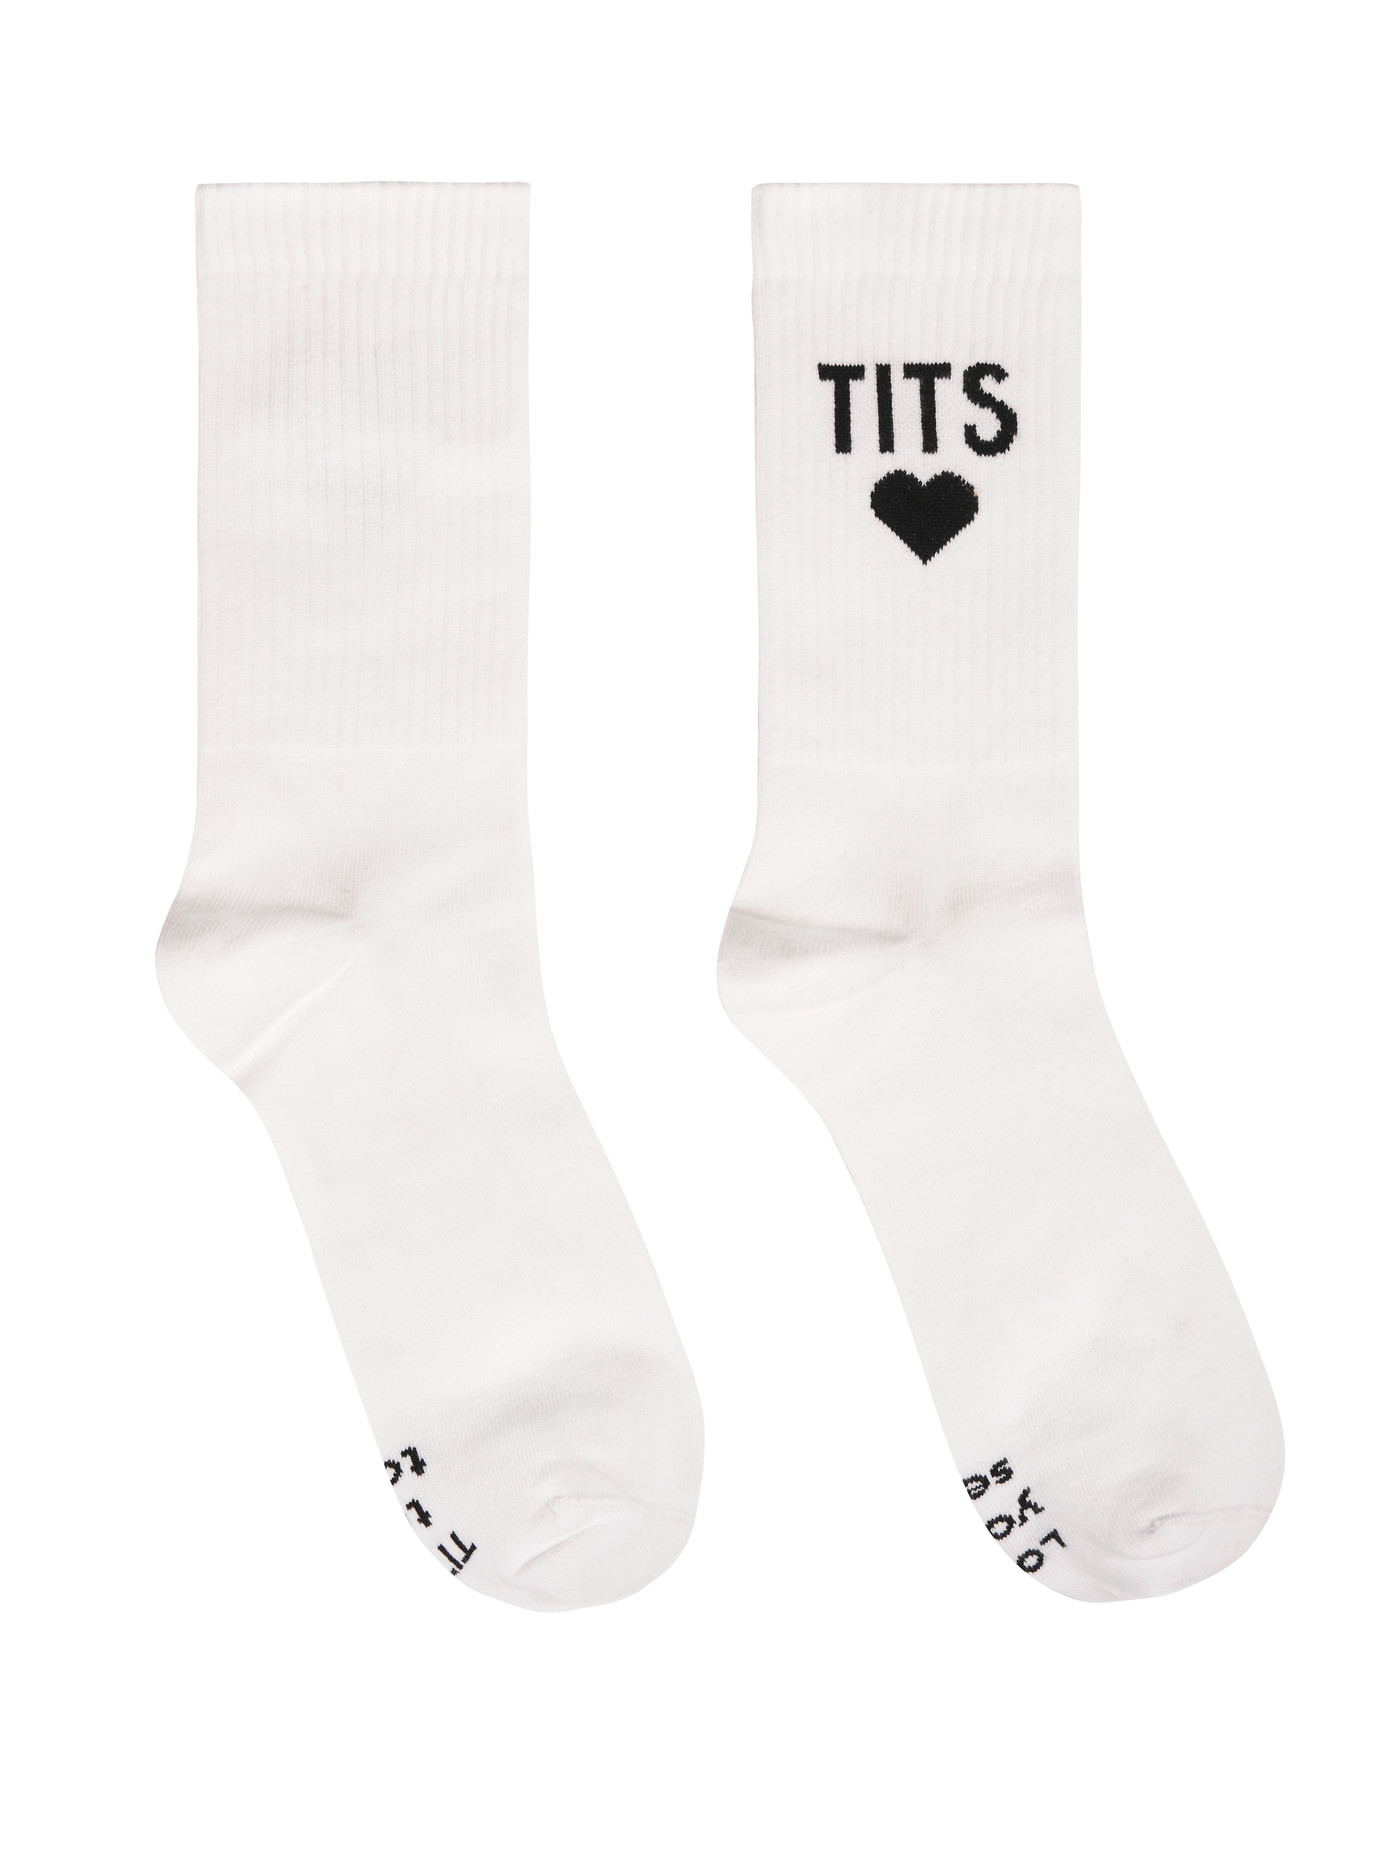 T.I.T.S. Store | Conscious fashion with a flirty wink - T.I.T.S. Store ...